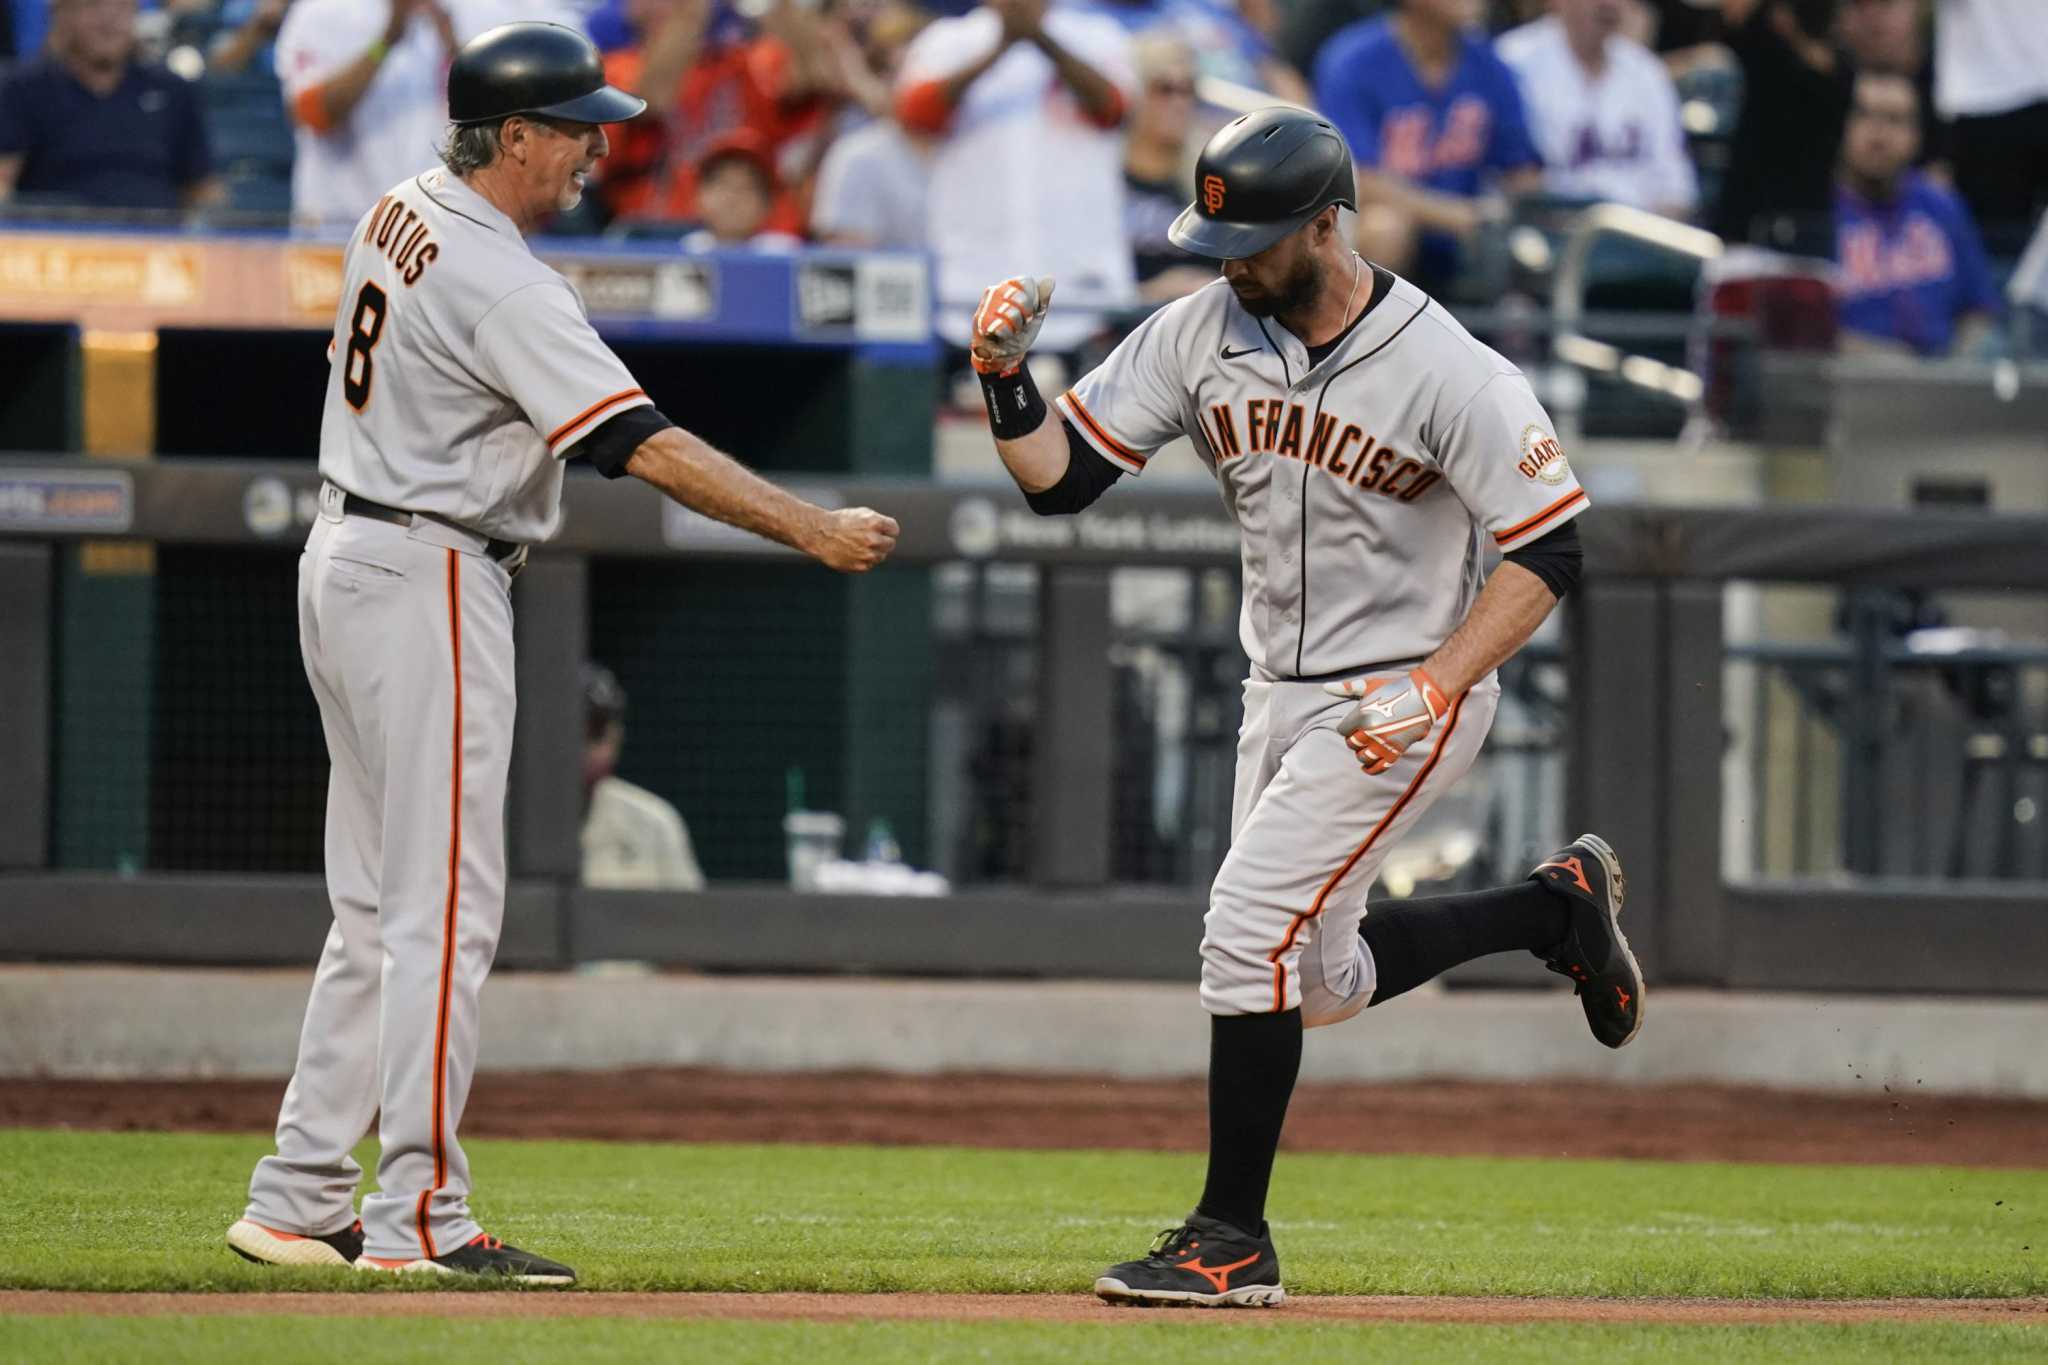 Emotional win for Giants' Brandon Belt, who homered twice after grandmother  died